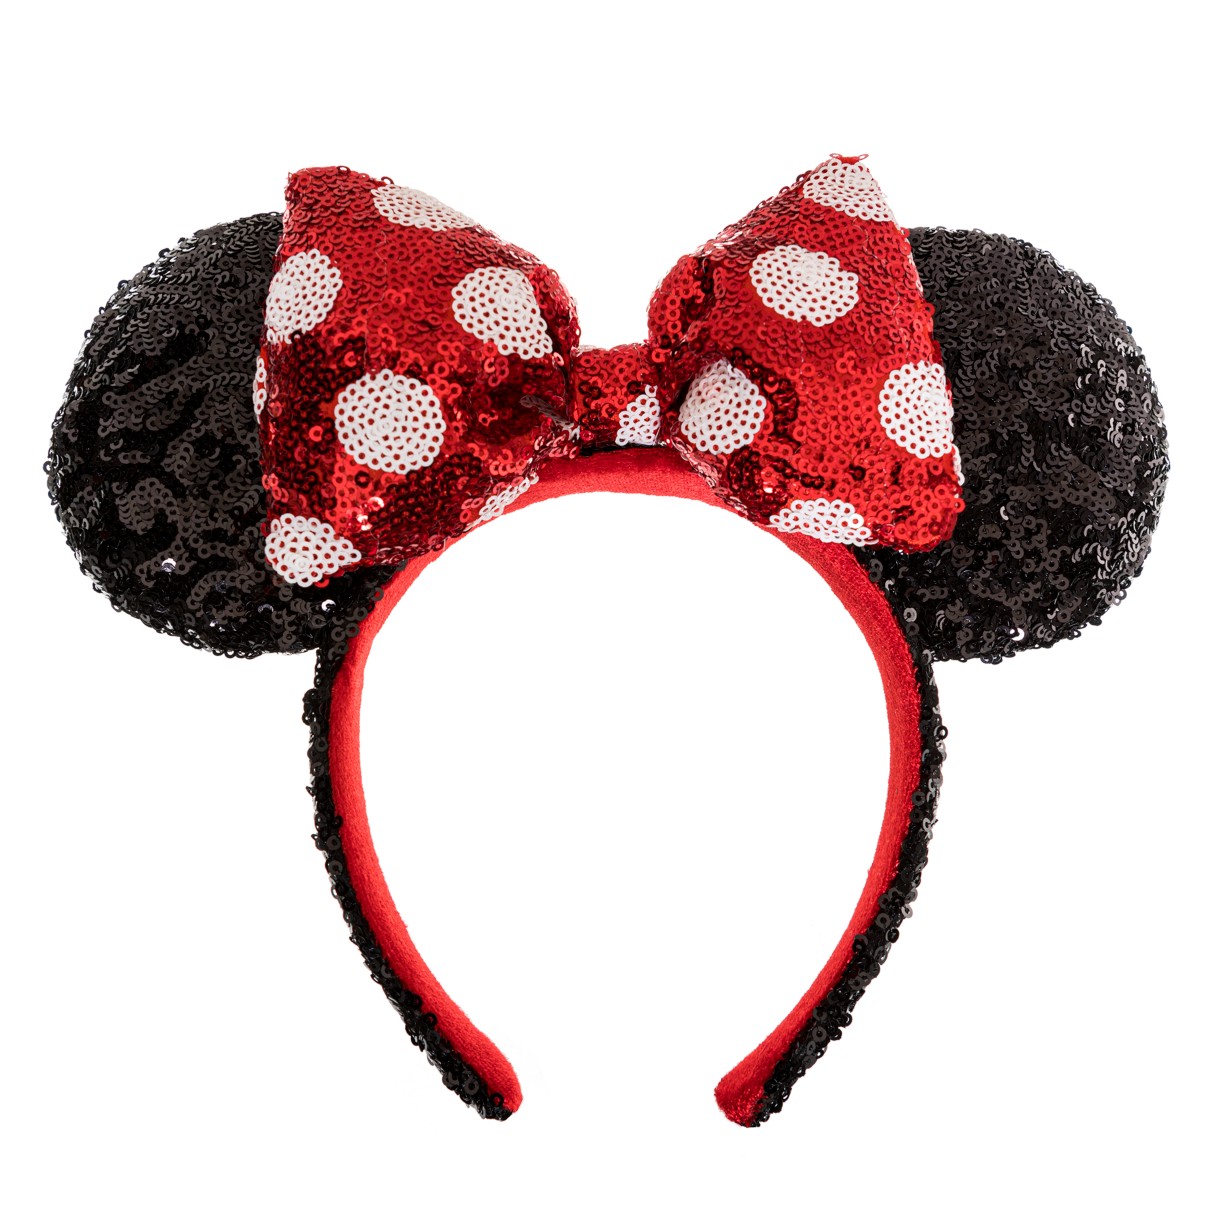 Minnie Mouse Sequin Ear Headband with Sequin Polka Dot Bow for Adults